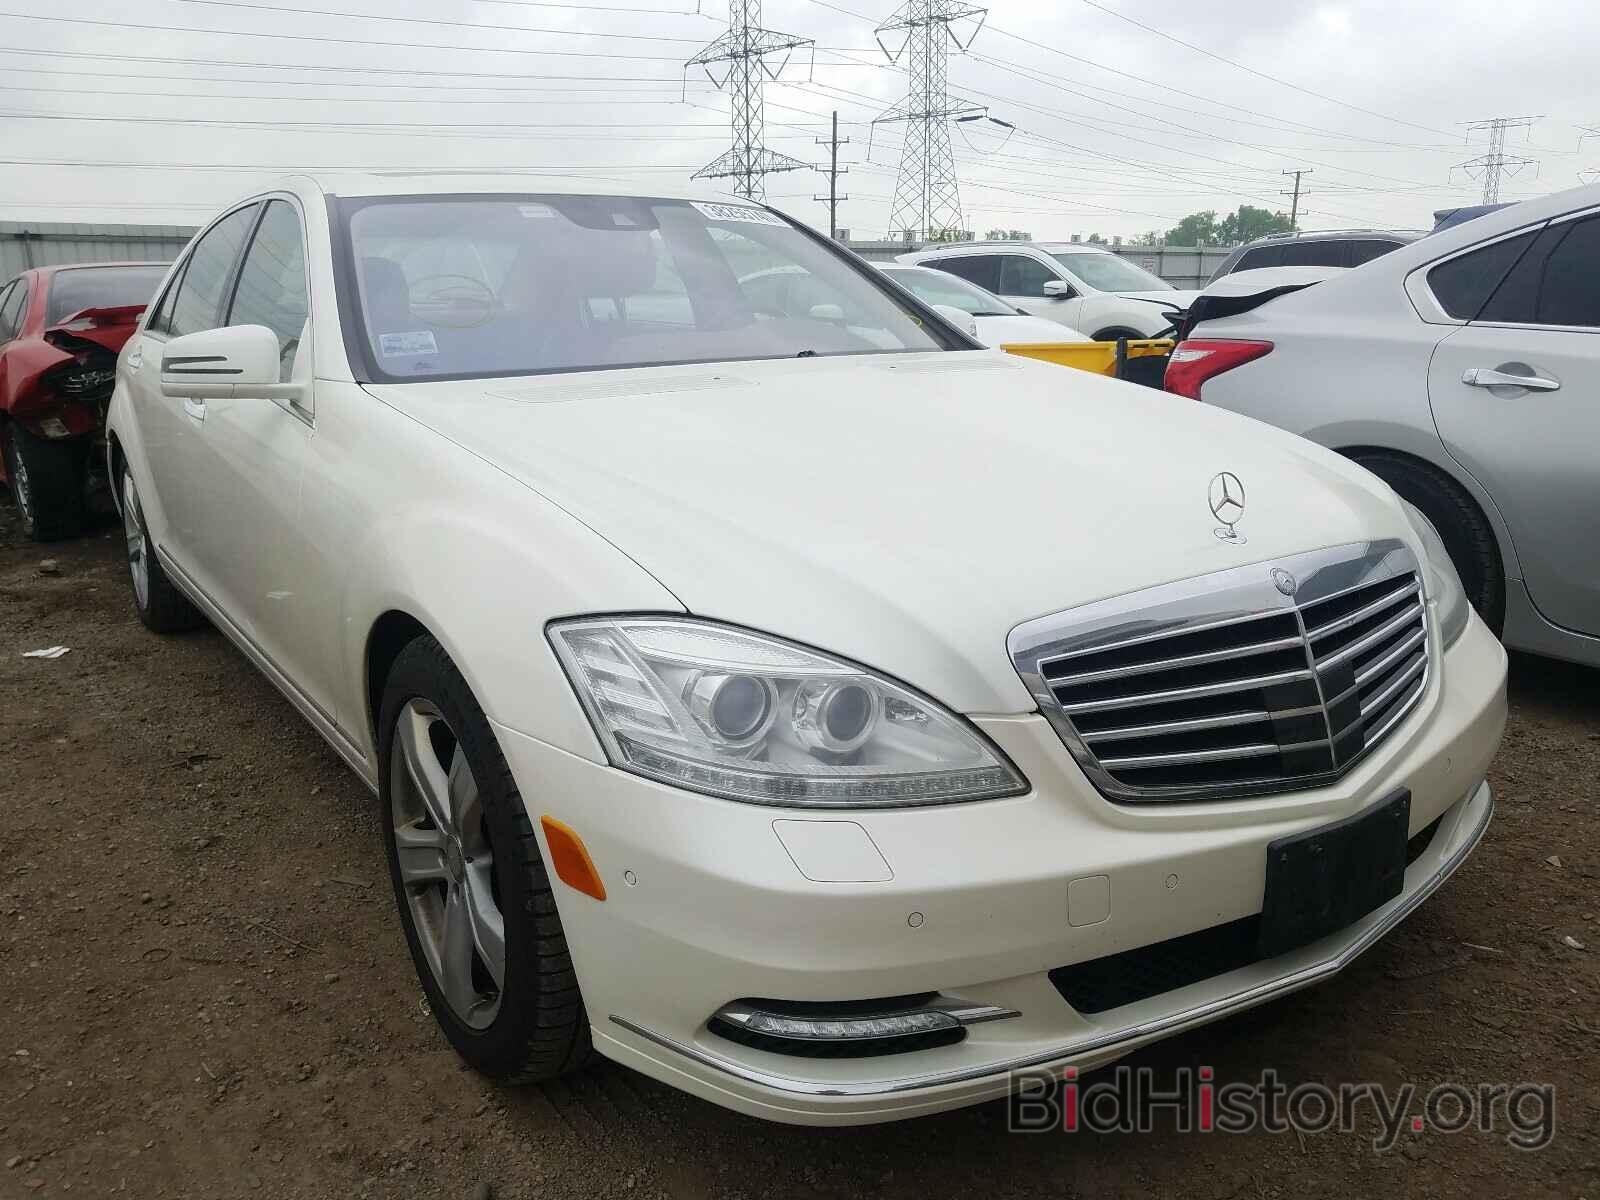 Photo WDDNG8GB7AA314155 - MERCEDES-BENZ S CLASS 2010